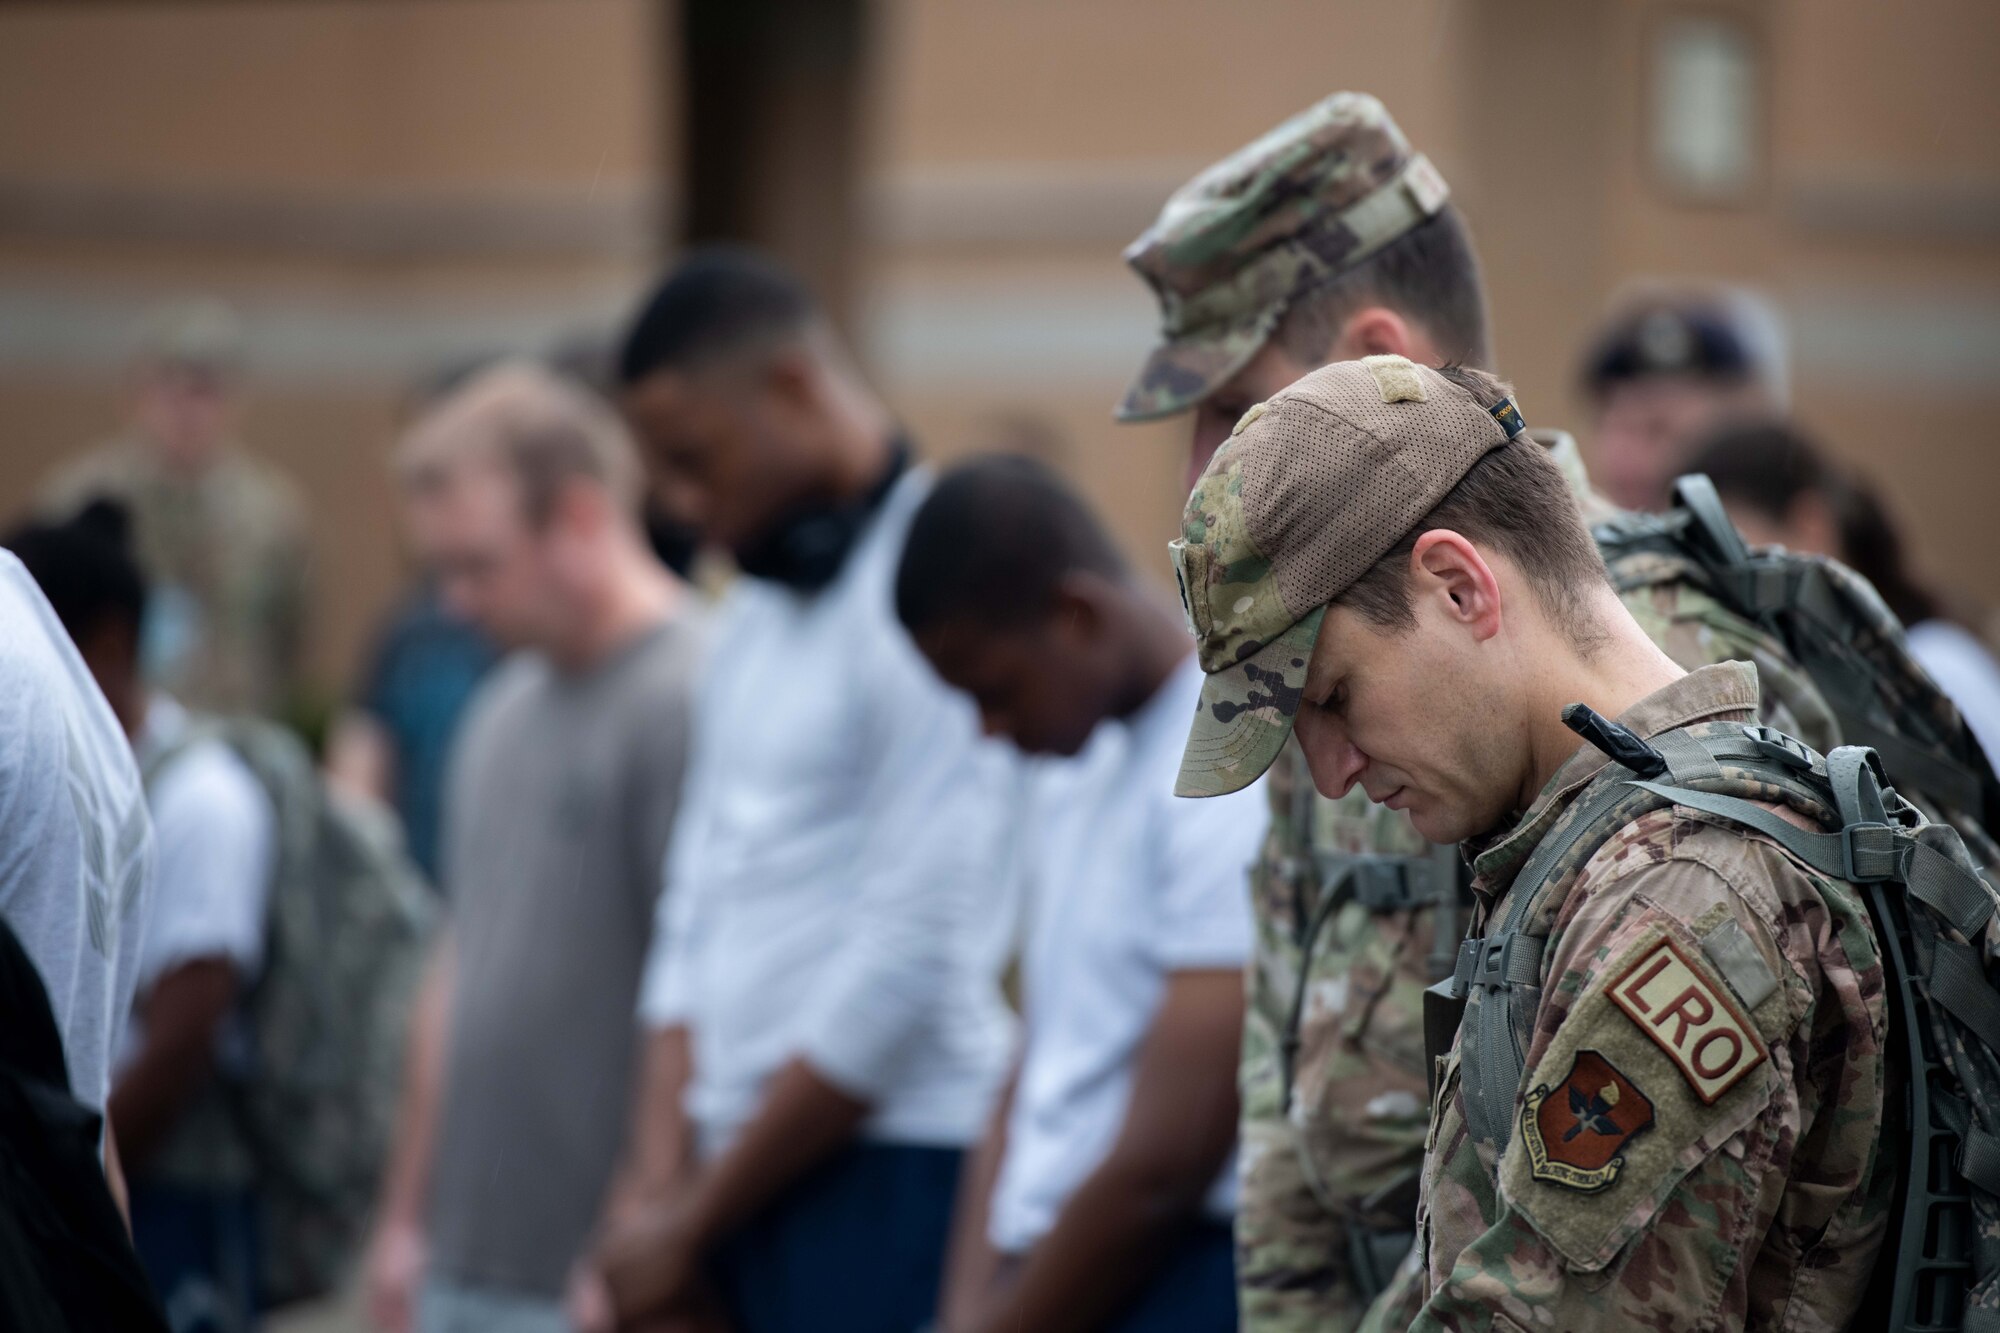 A group of Airmen and civilians bow their heads to pay respects to the Prisoners of War and Missing in Action men and women, at Maxwell Air Force Base, September 9, 2022. The march consisted of several stops to honor the fallen.